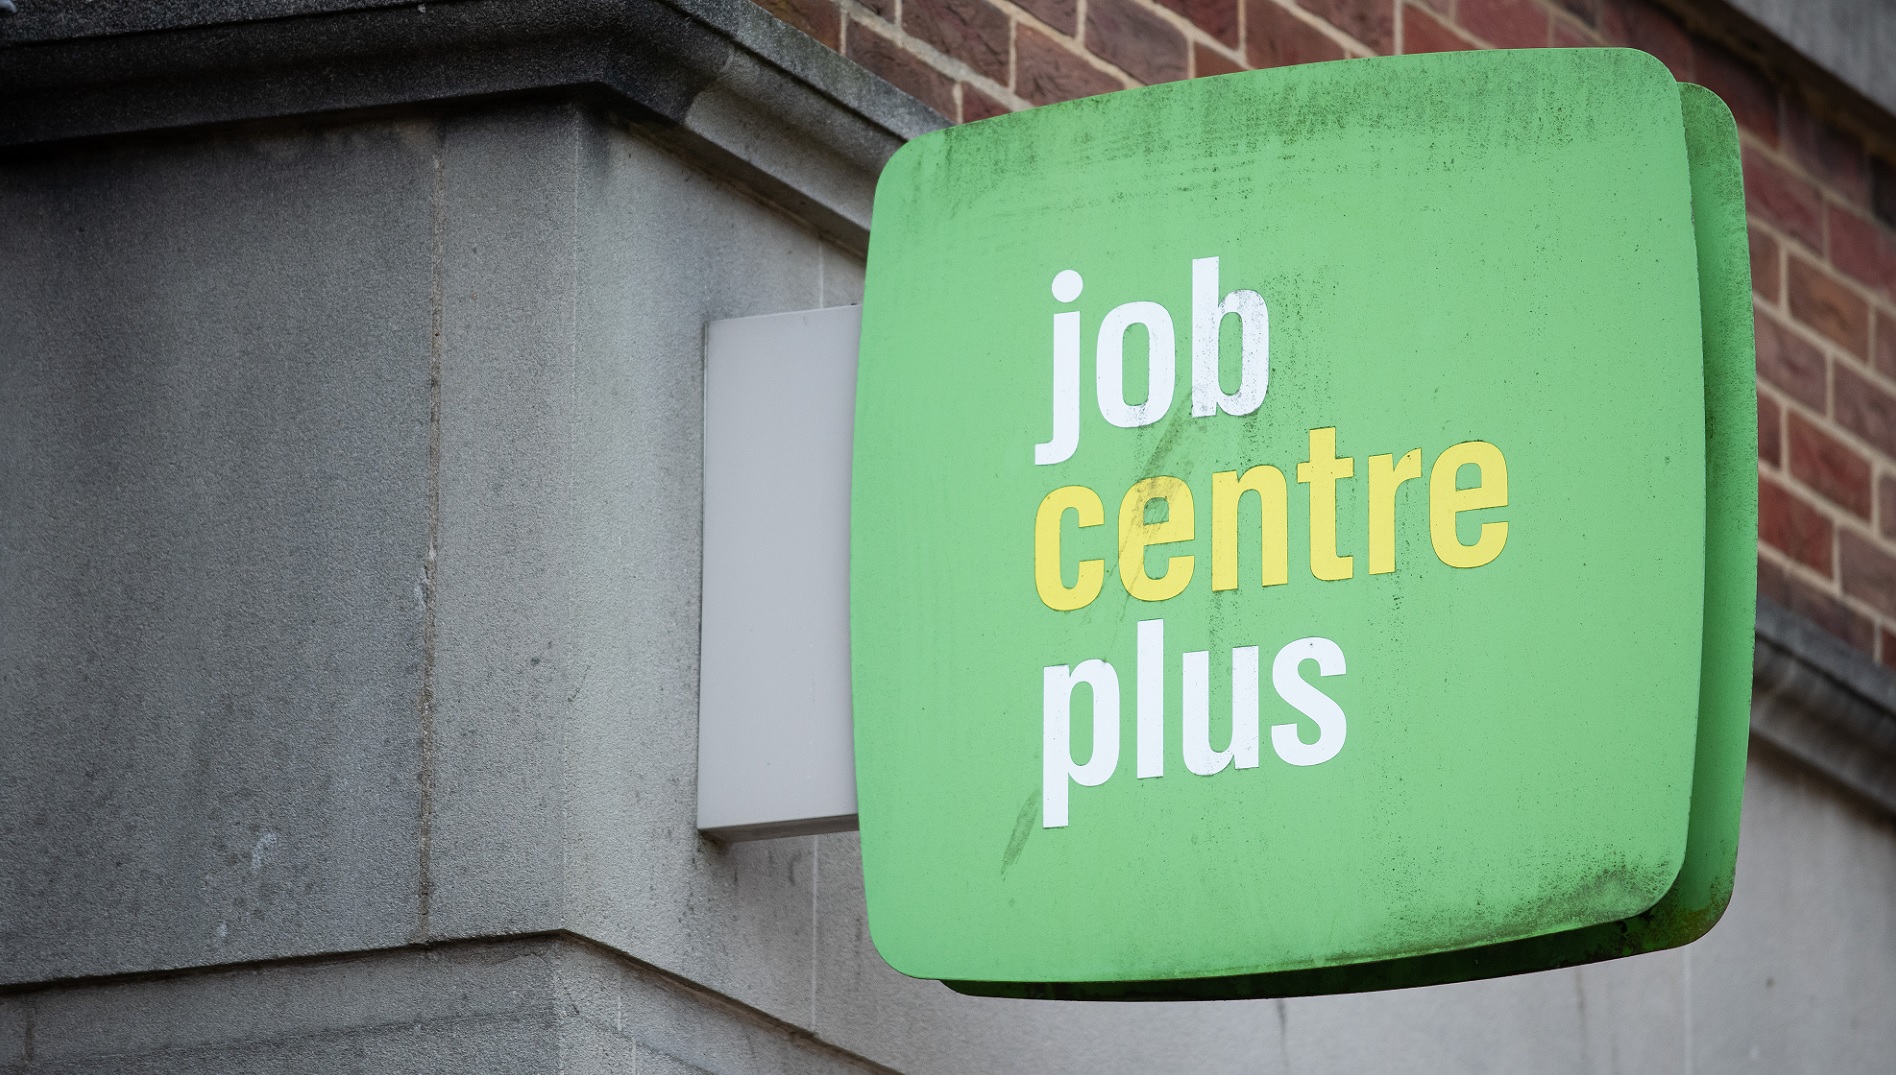 unemployment-rate-in-scotland-fell-to-record-low-last-quarter-flipboard